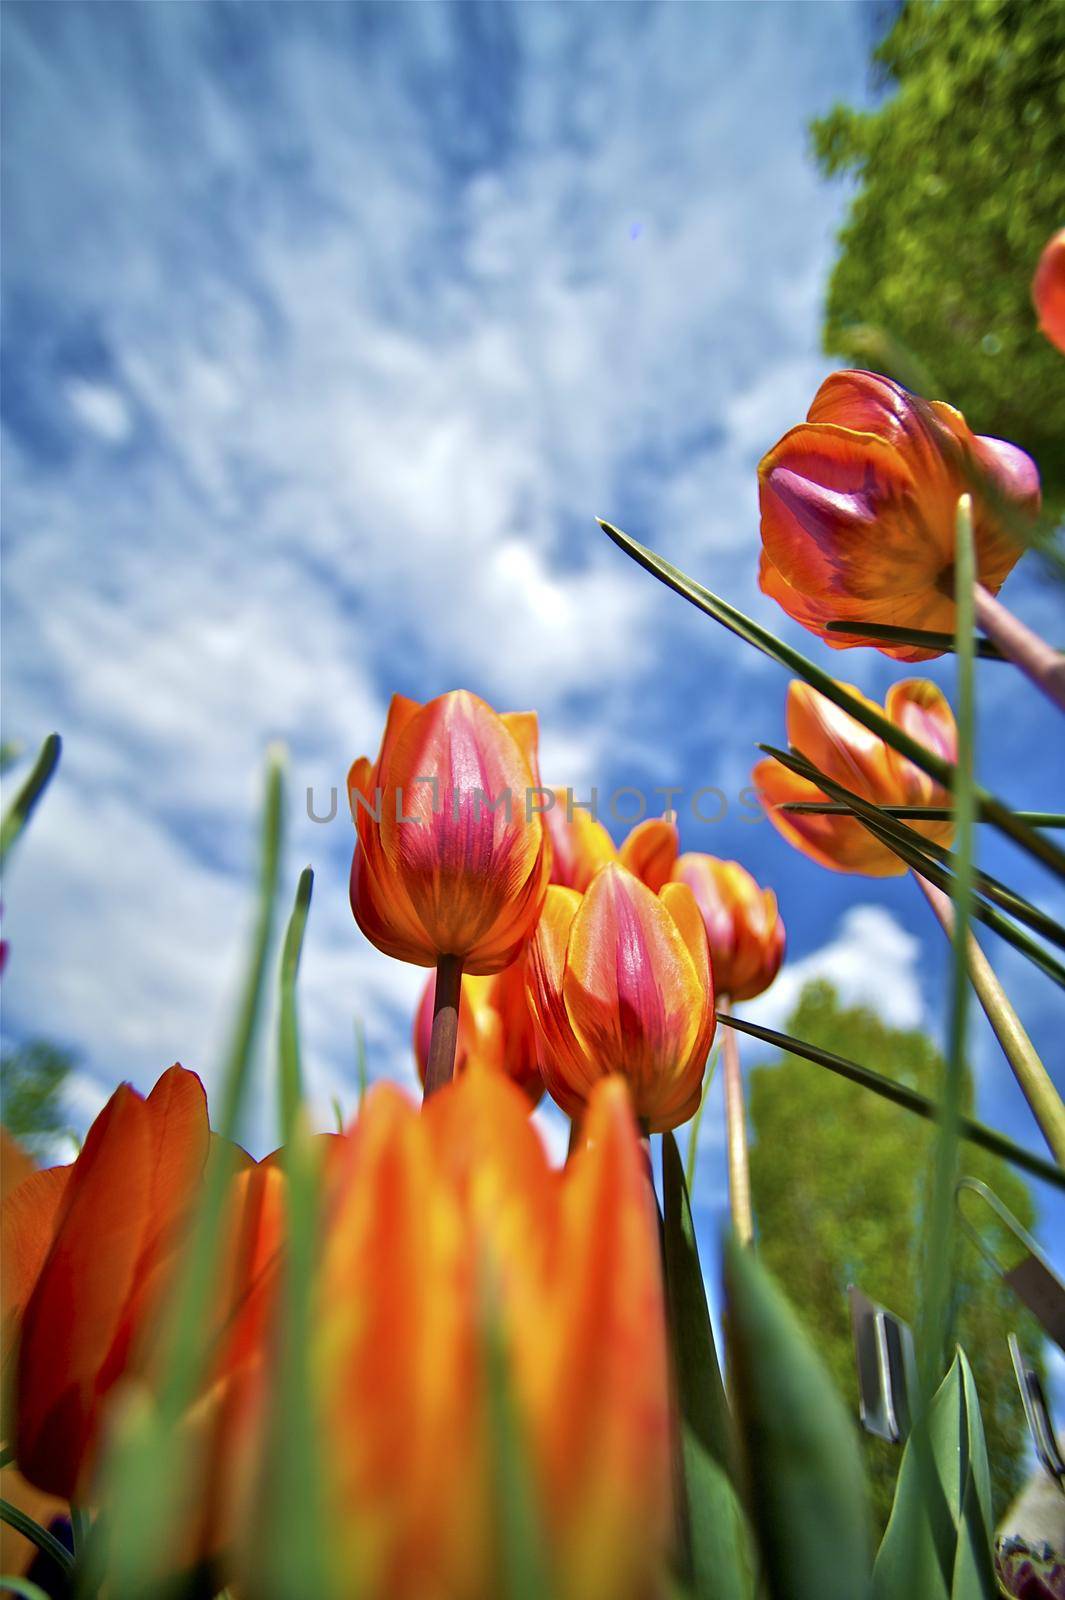 Beautiful Tulips Wide Angle Closeup Photo. Blossom Red-Orange Tulips Vertical Photo. Flowers Photo Collection. by welcomia